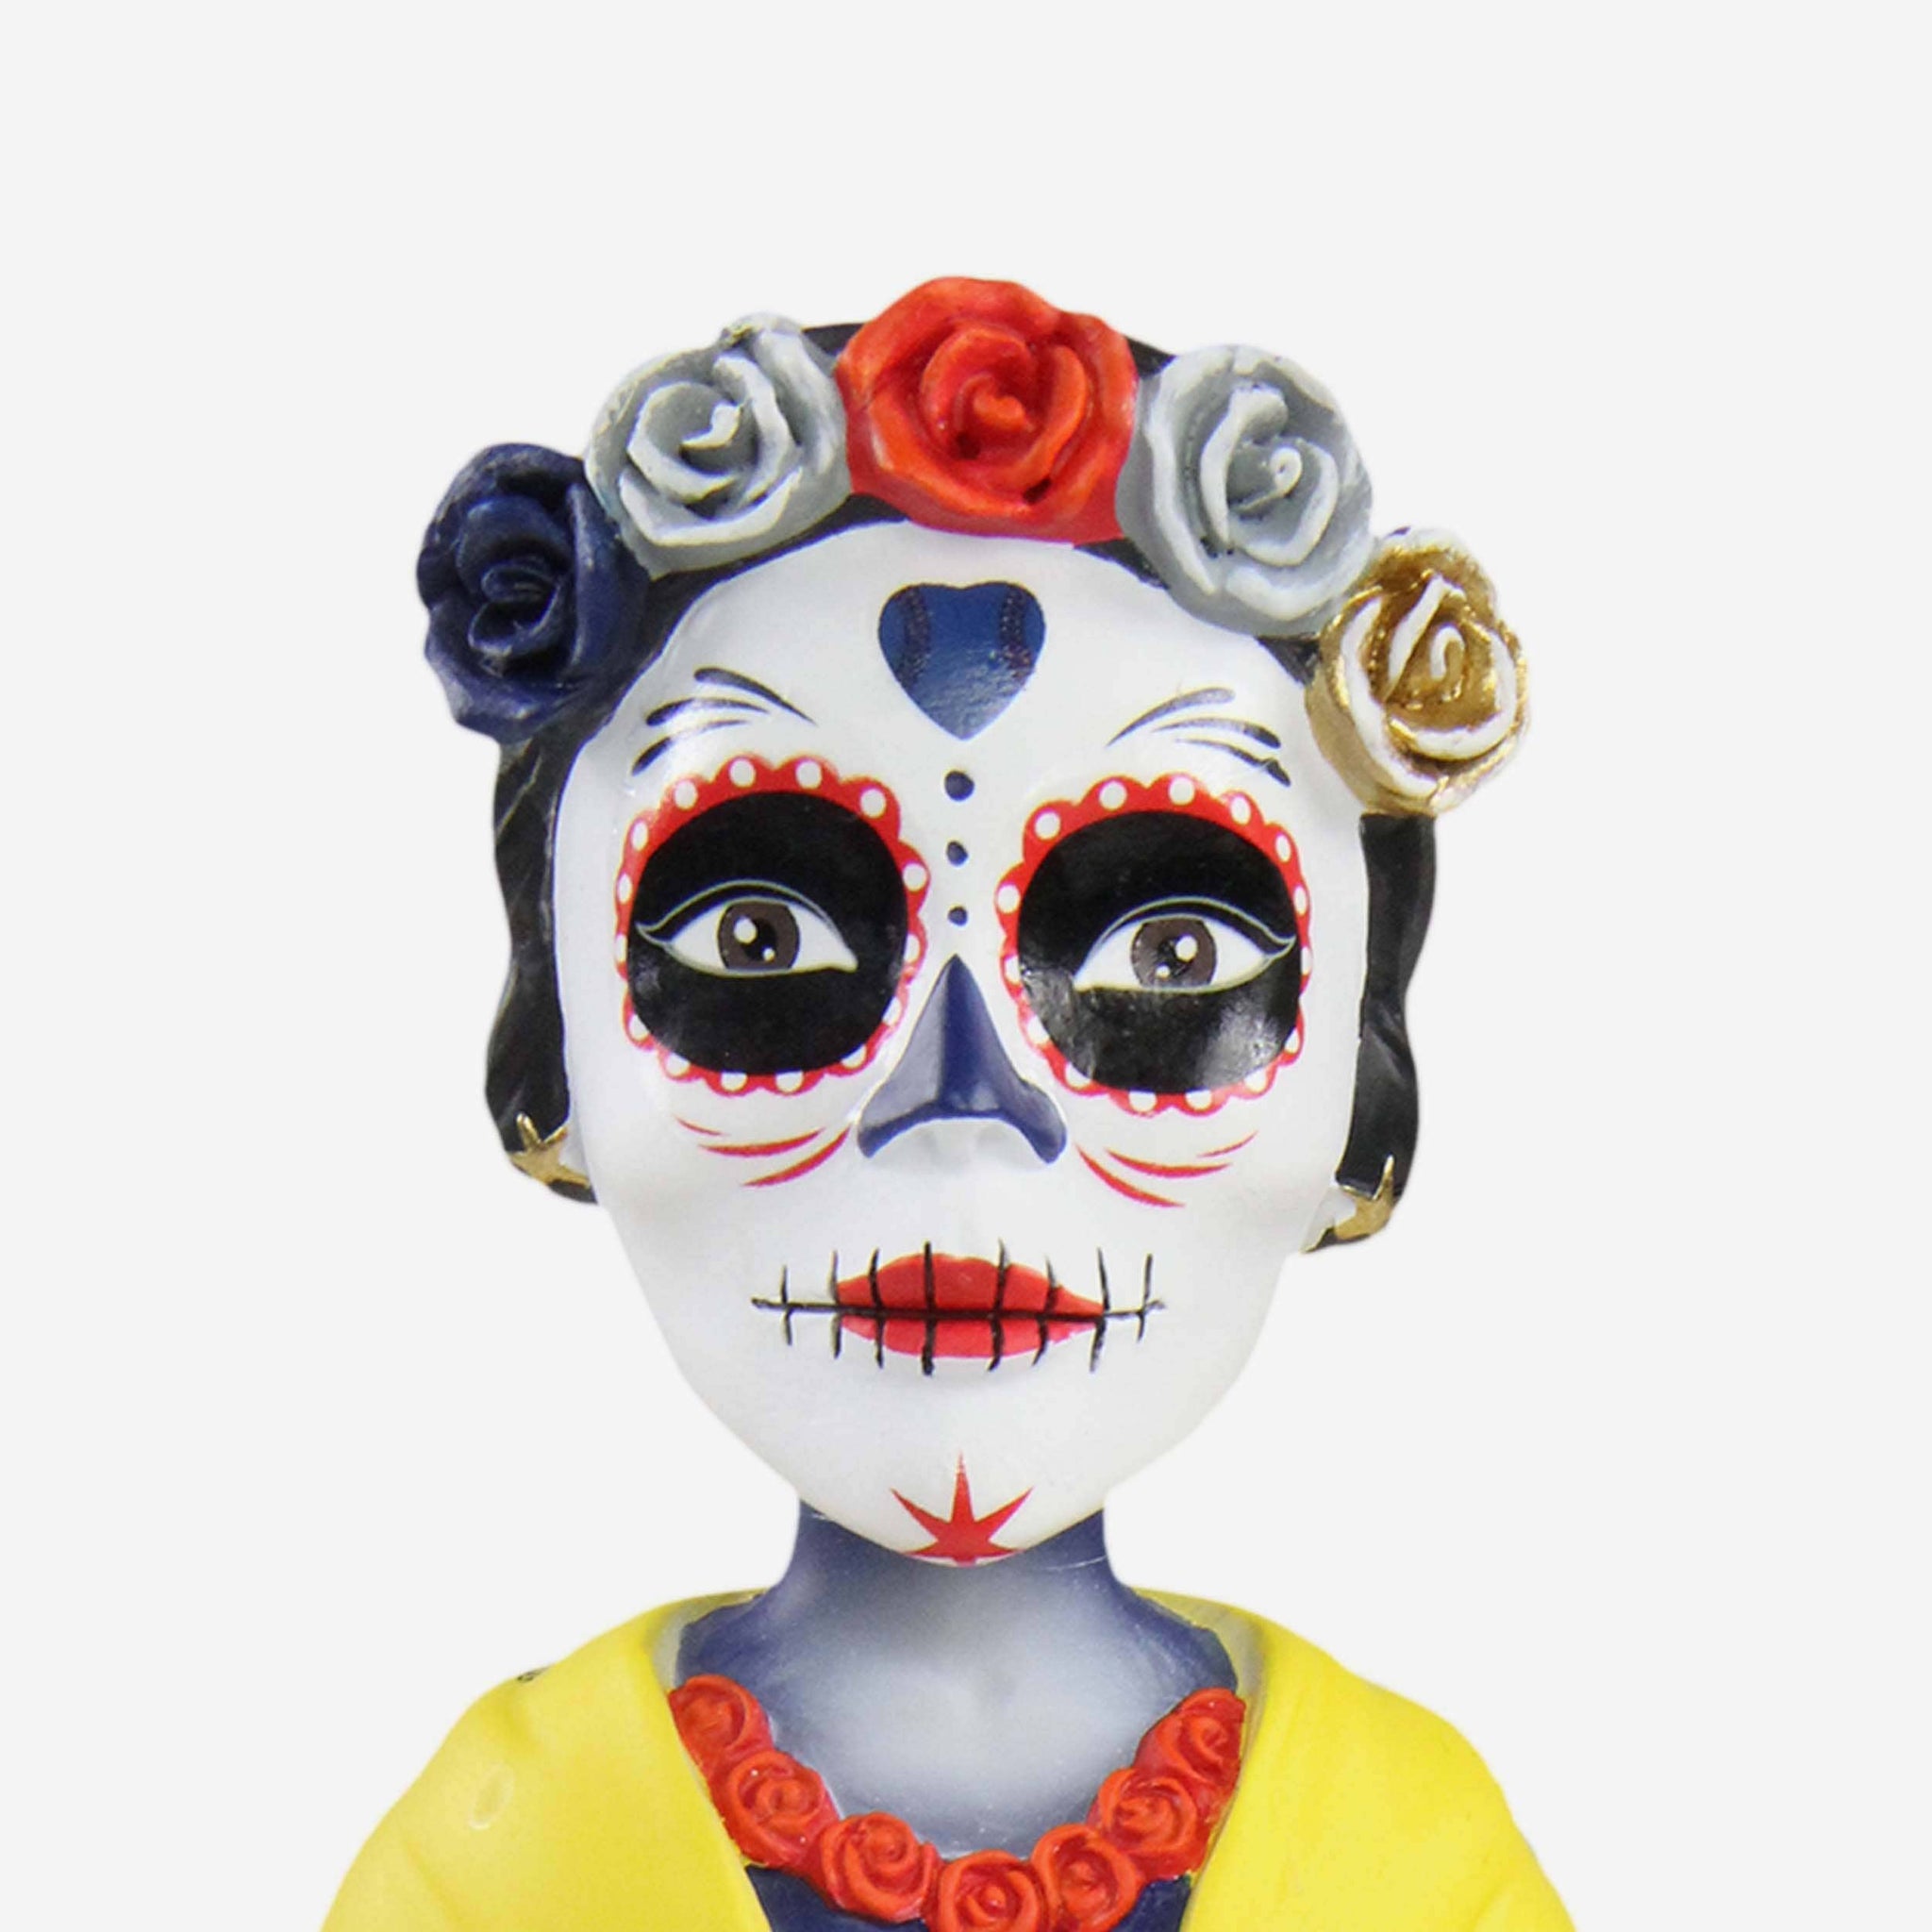 Los Angeles Dodgers Day Of The Dead Guitar Bobblehead FOCO